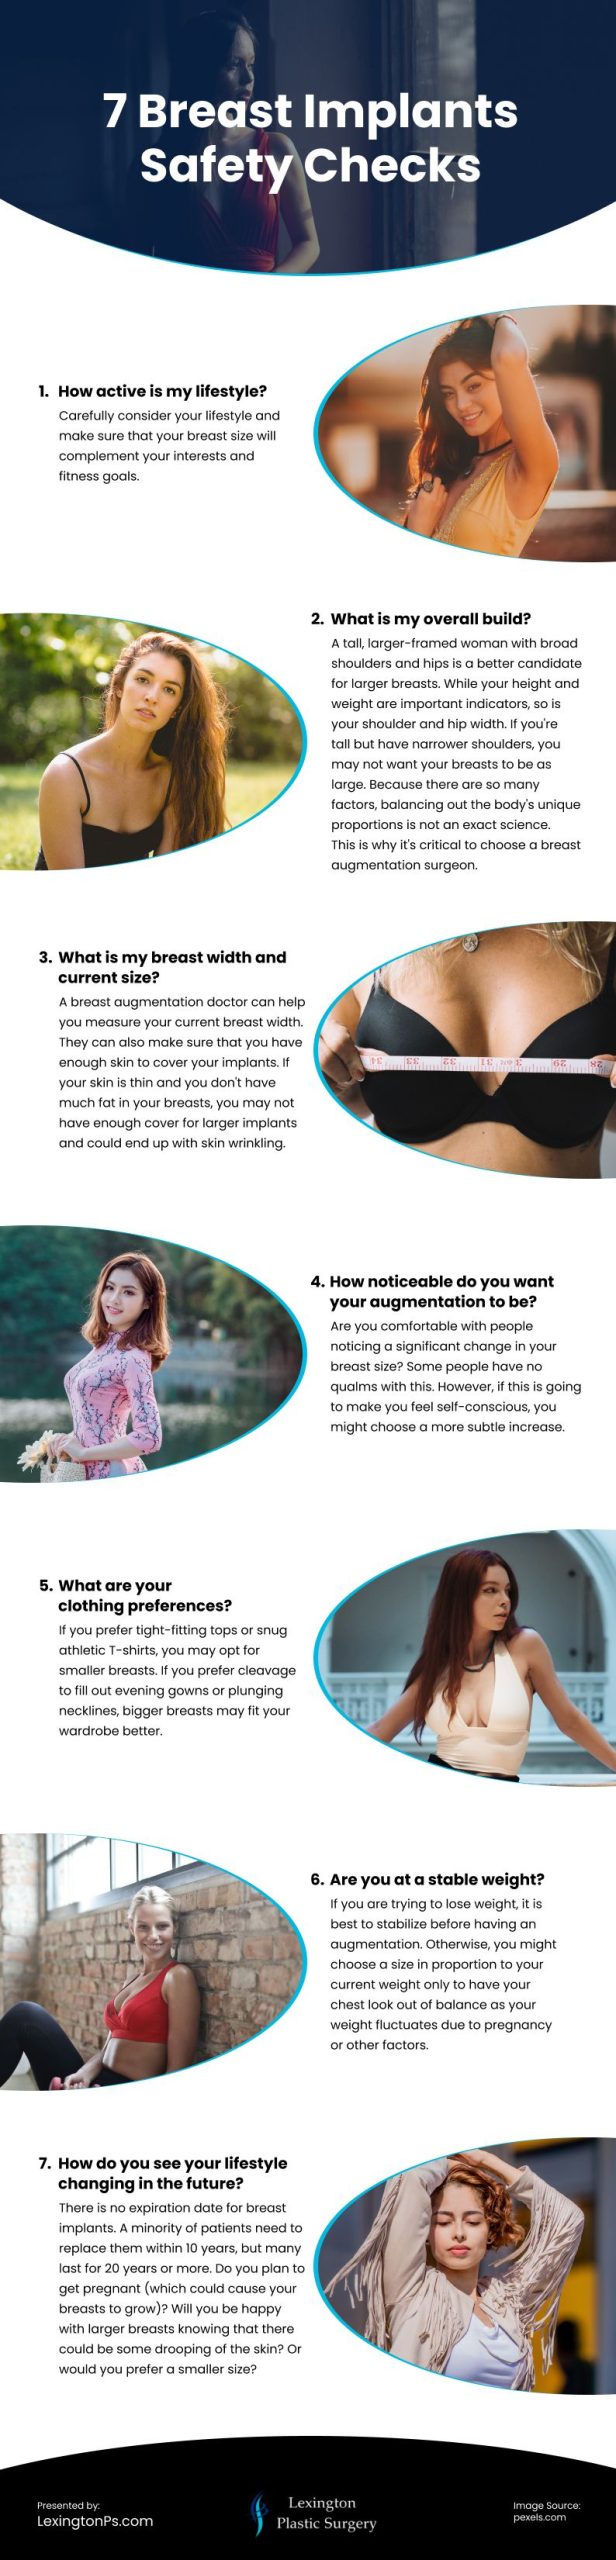 7 Breast Implants Safety Checks Infographic